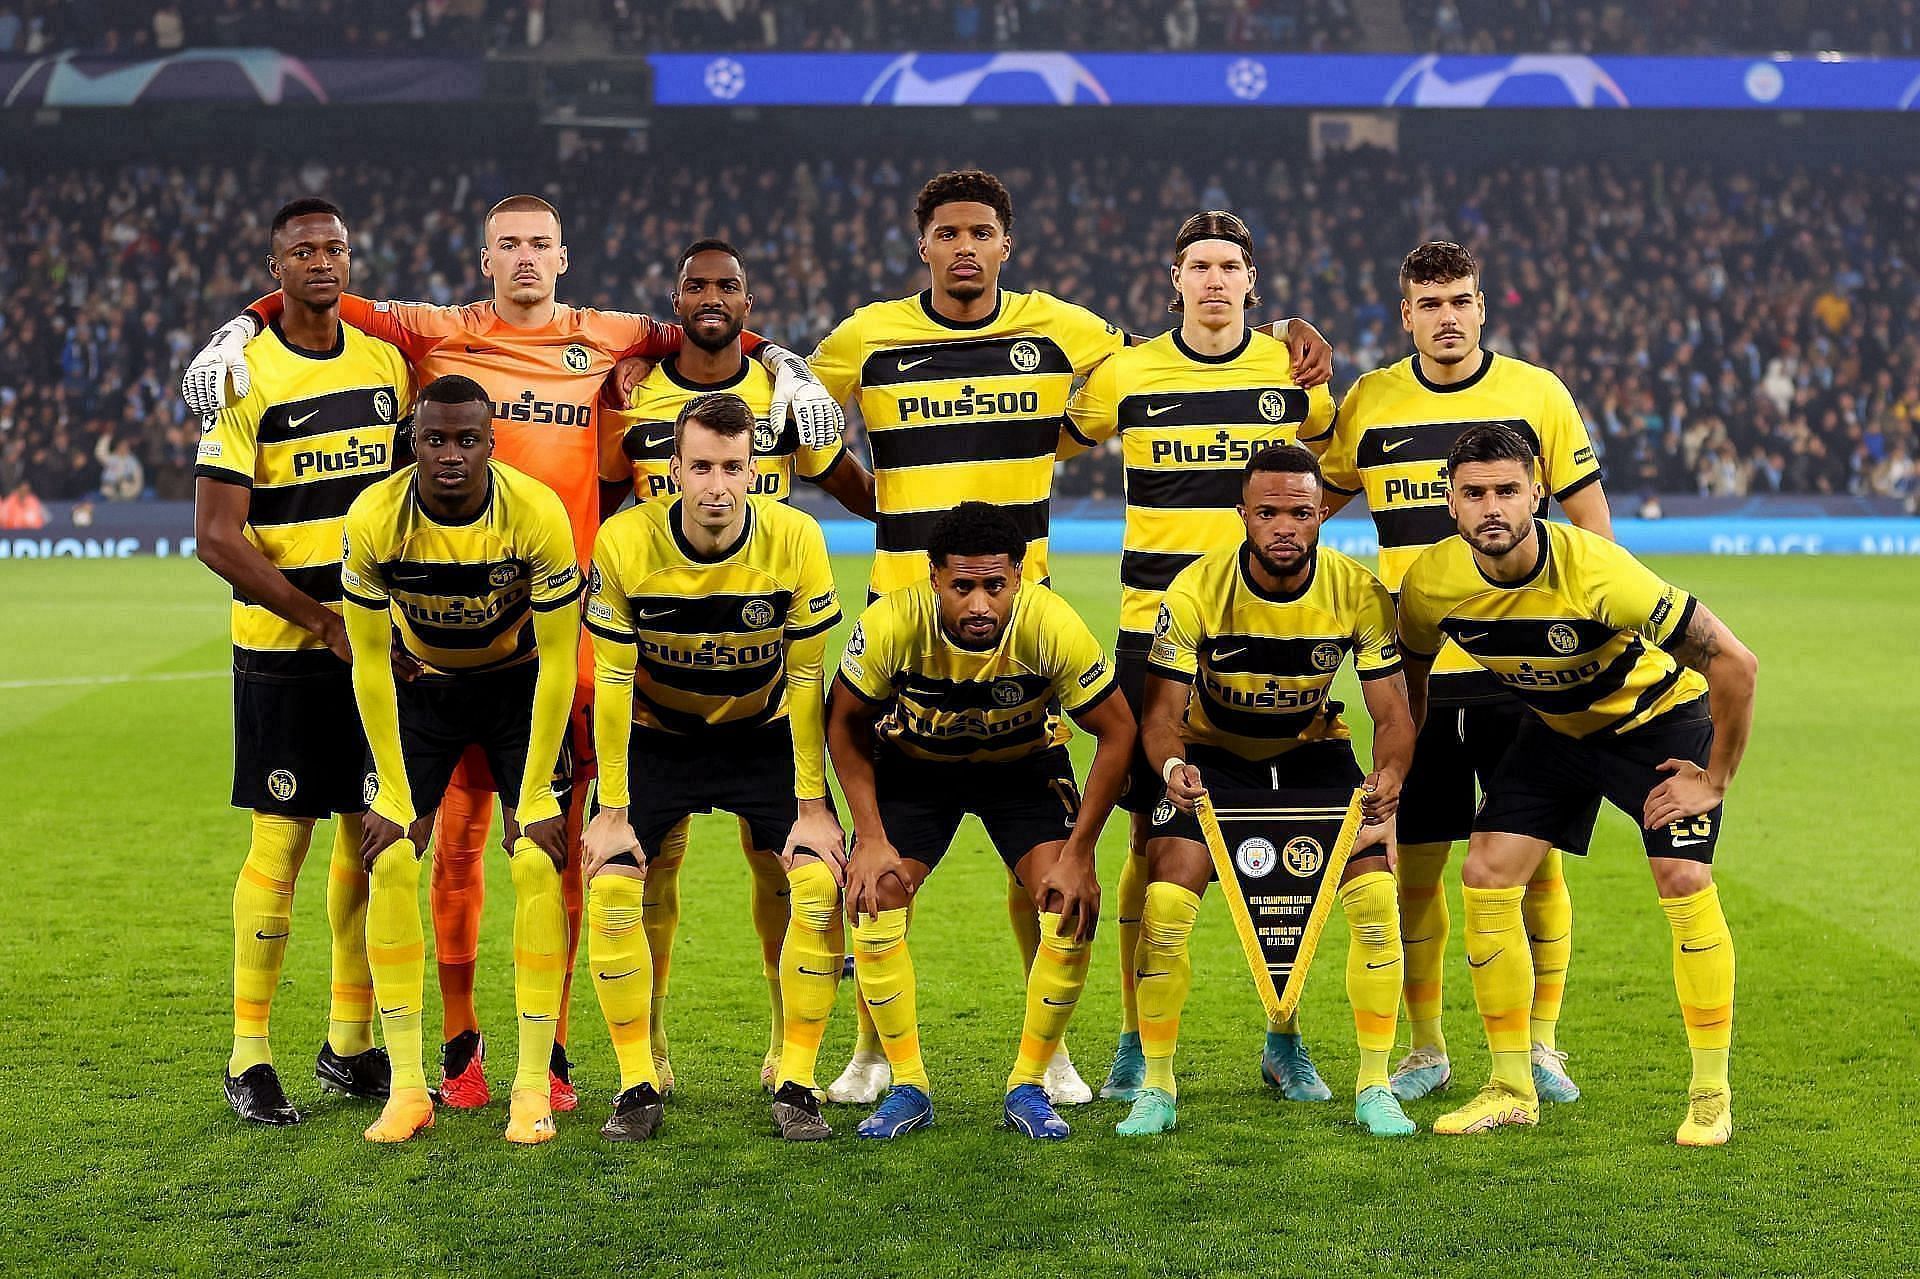 Young Boys face Stade-Lausanne on Saturday 